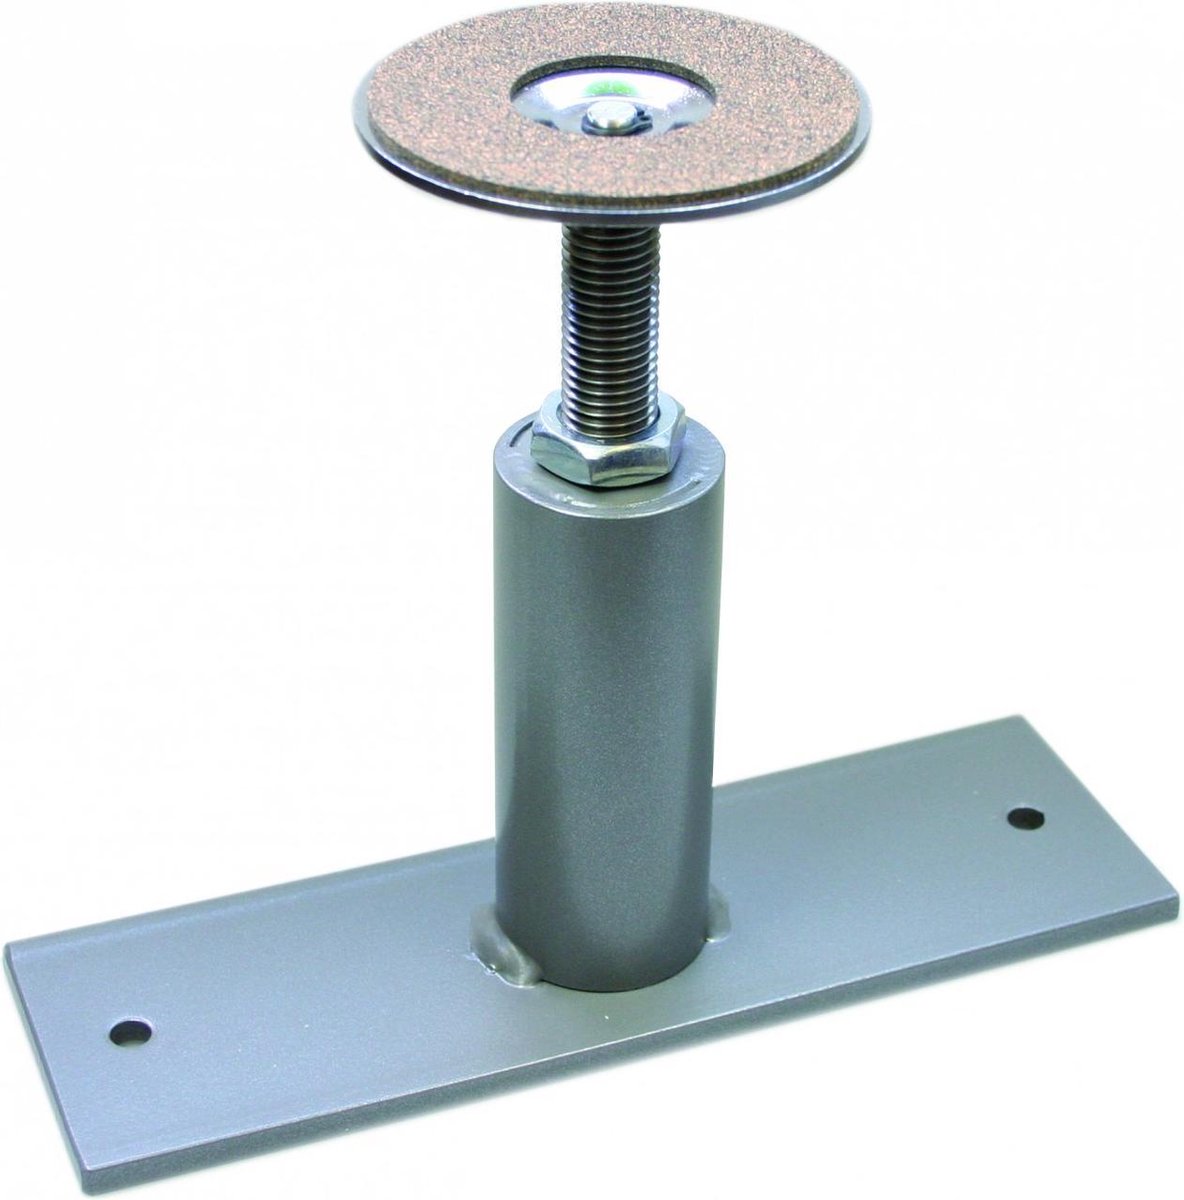 NOHrD ceiling mount for SlimBeam multi-gym ceiling height of 241-259 cm